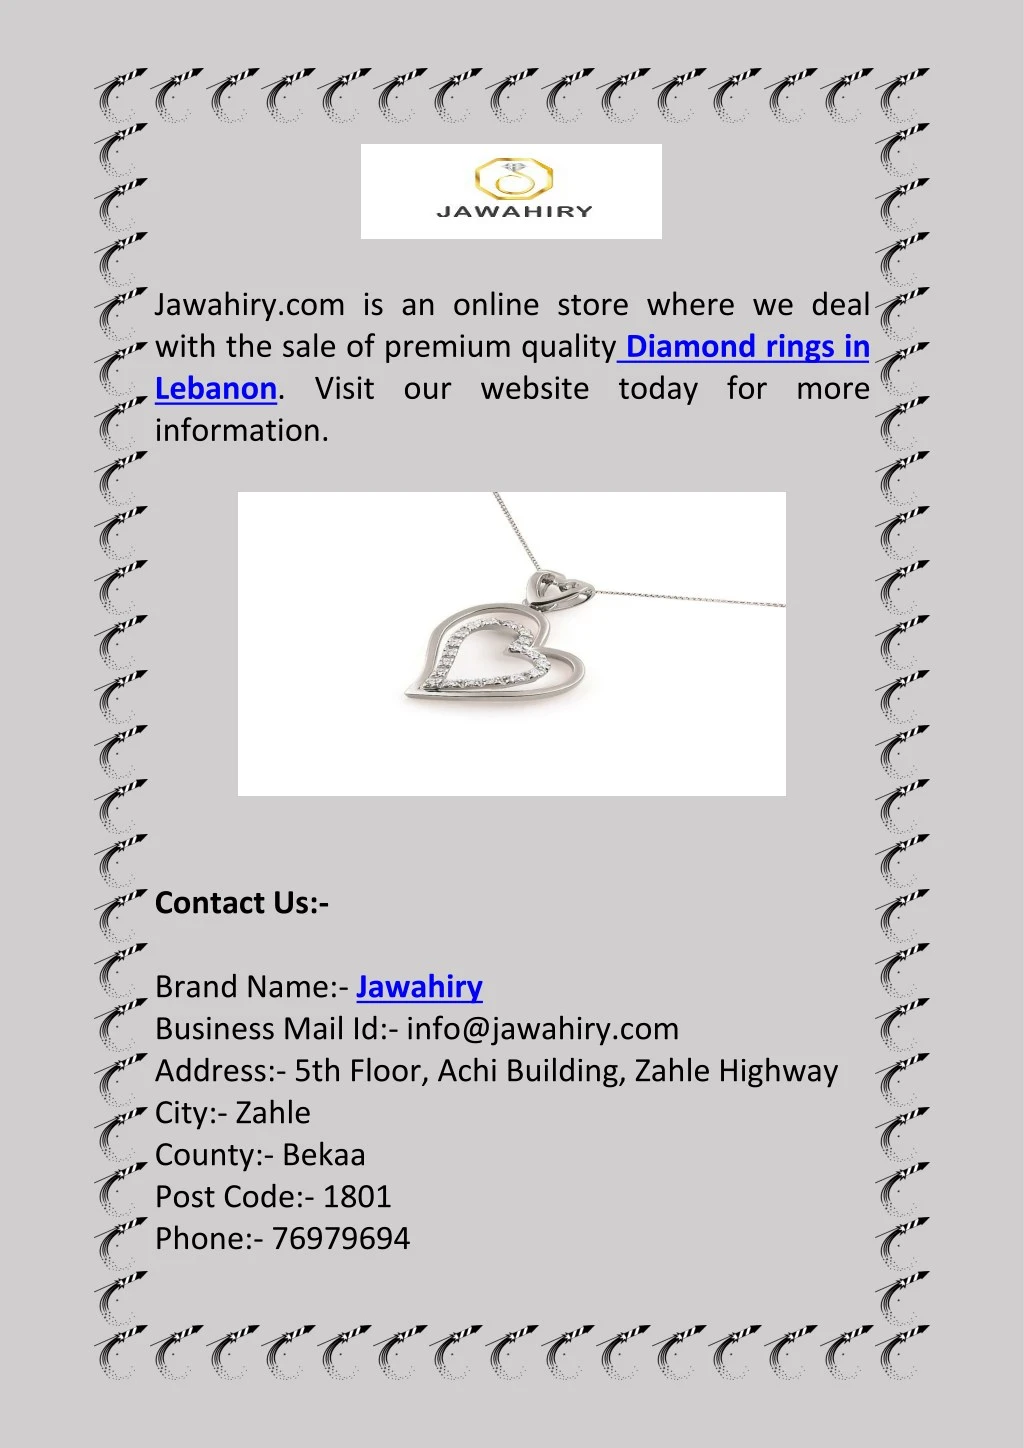 jawahiry com is an online store where we deal